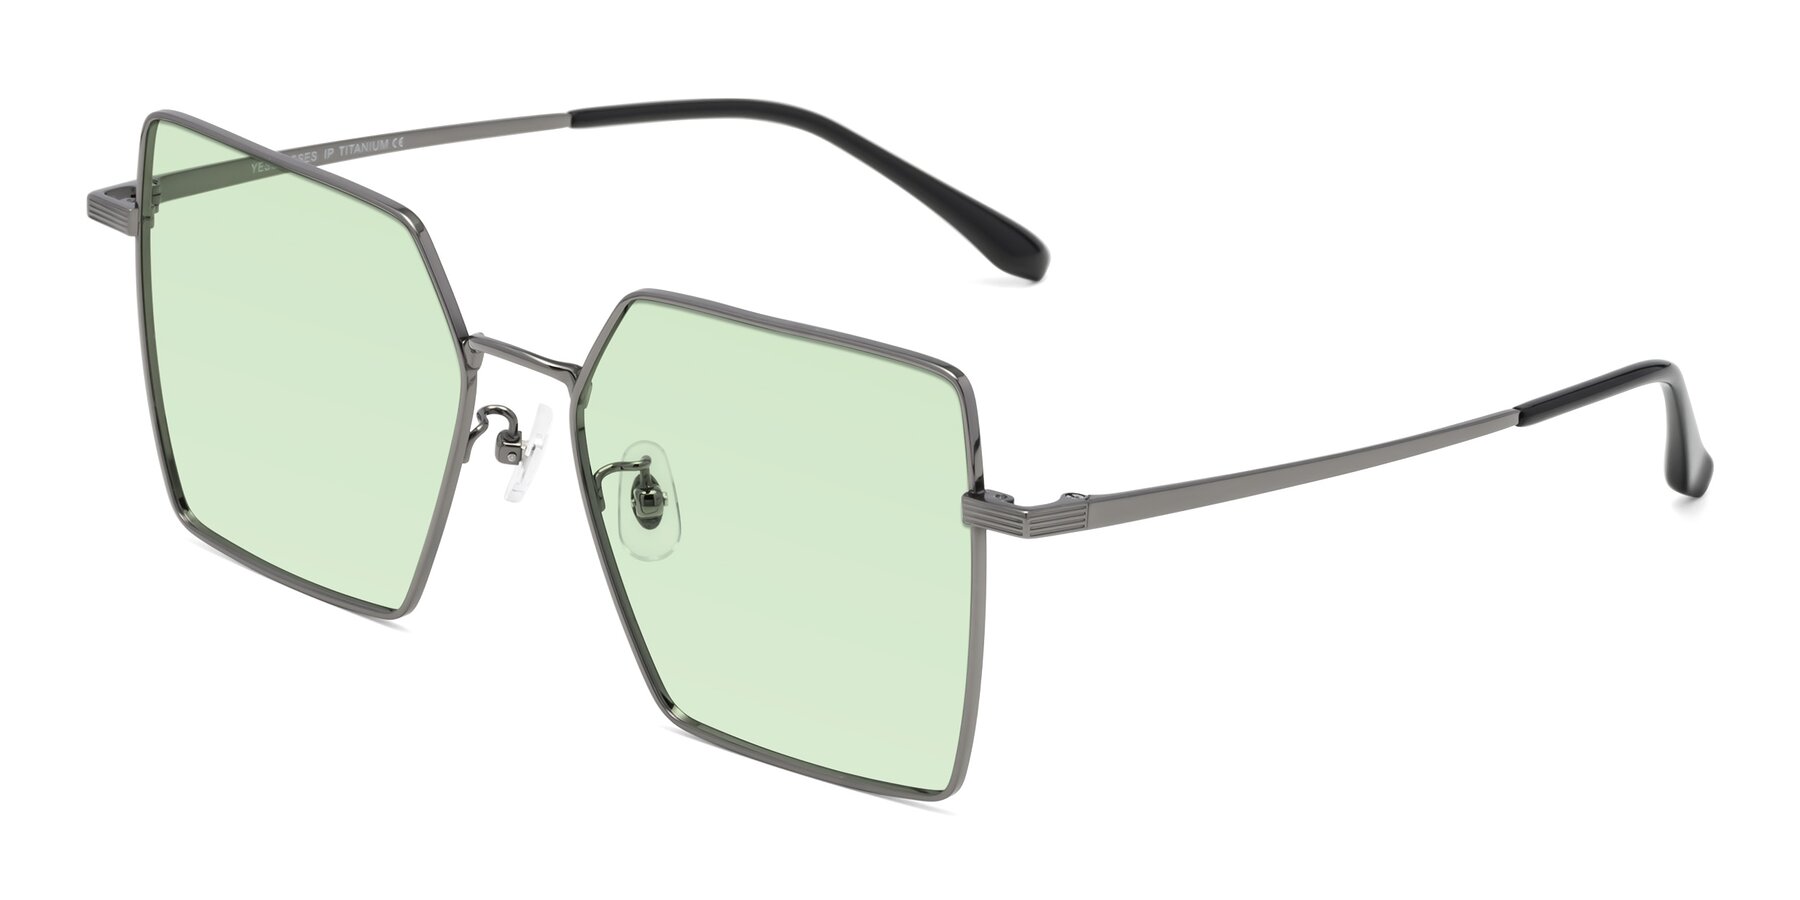 Angle of La Villa in Gunmetal with Light Green Tinted Lenses